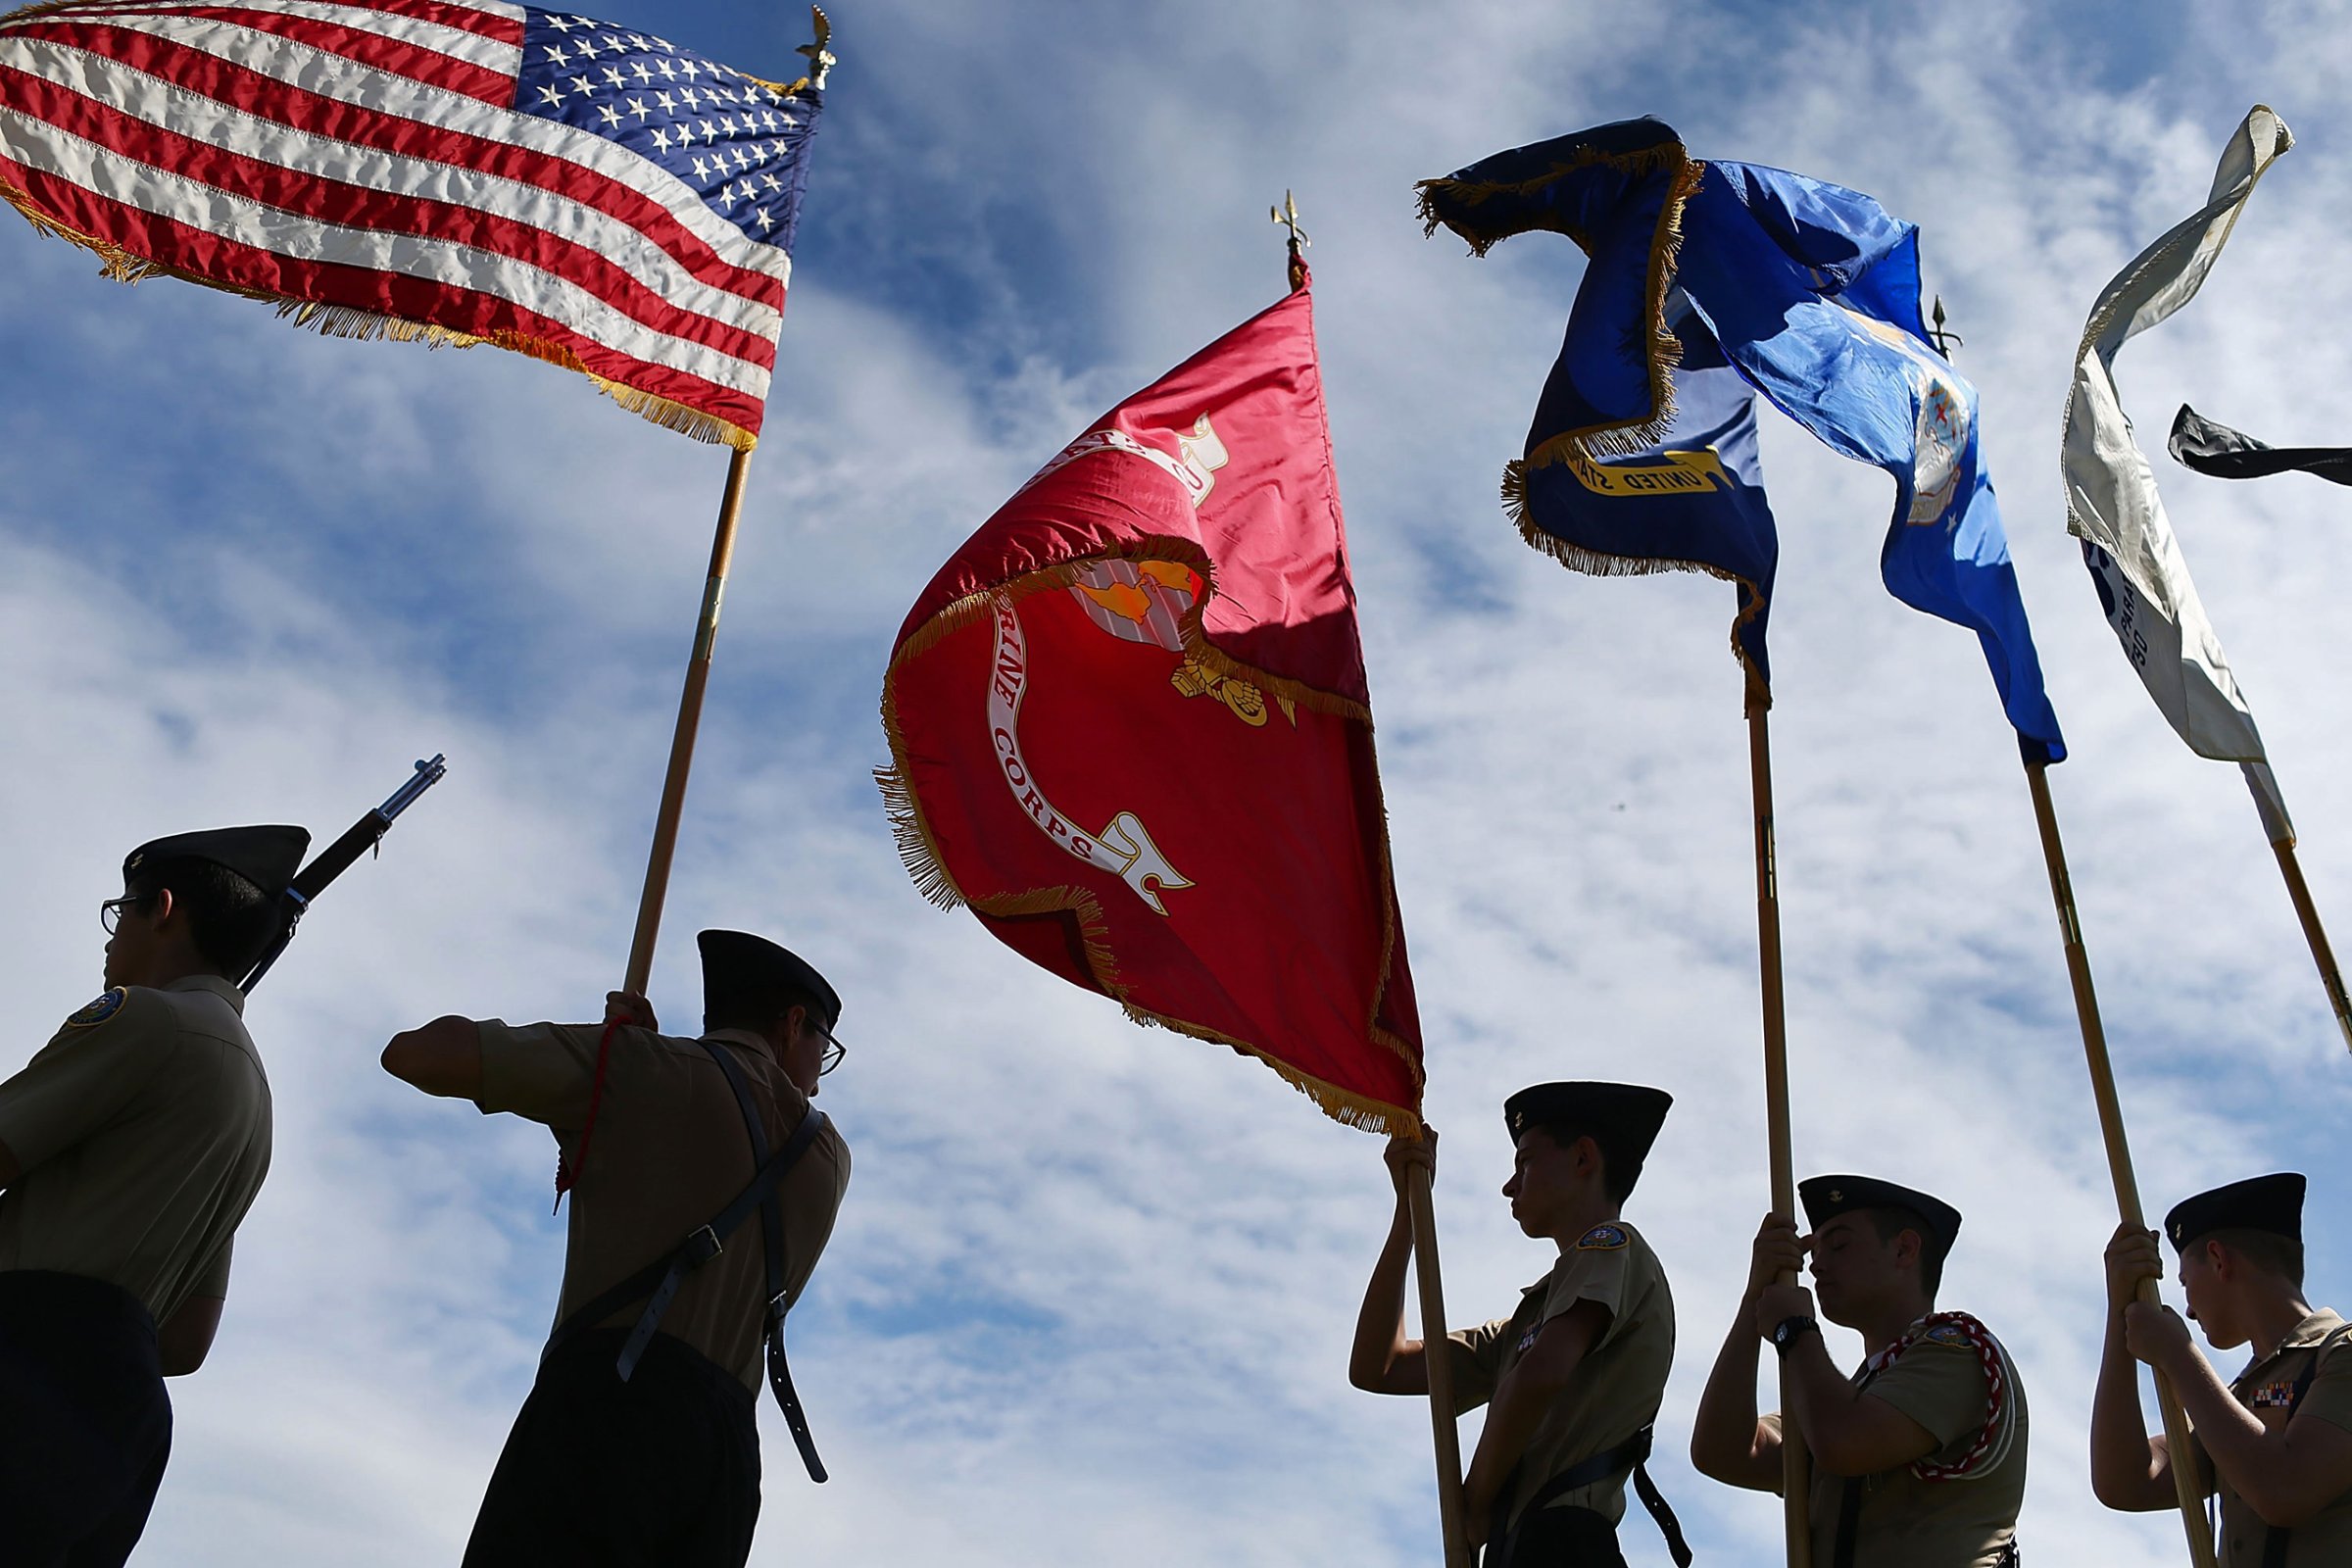 Members of the G. Holmes Braddock Senior High School NJROTC color guard carry their flags during a Veterans day ceremony in Miami Beach, Florida, on Nov. 11, 2015.